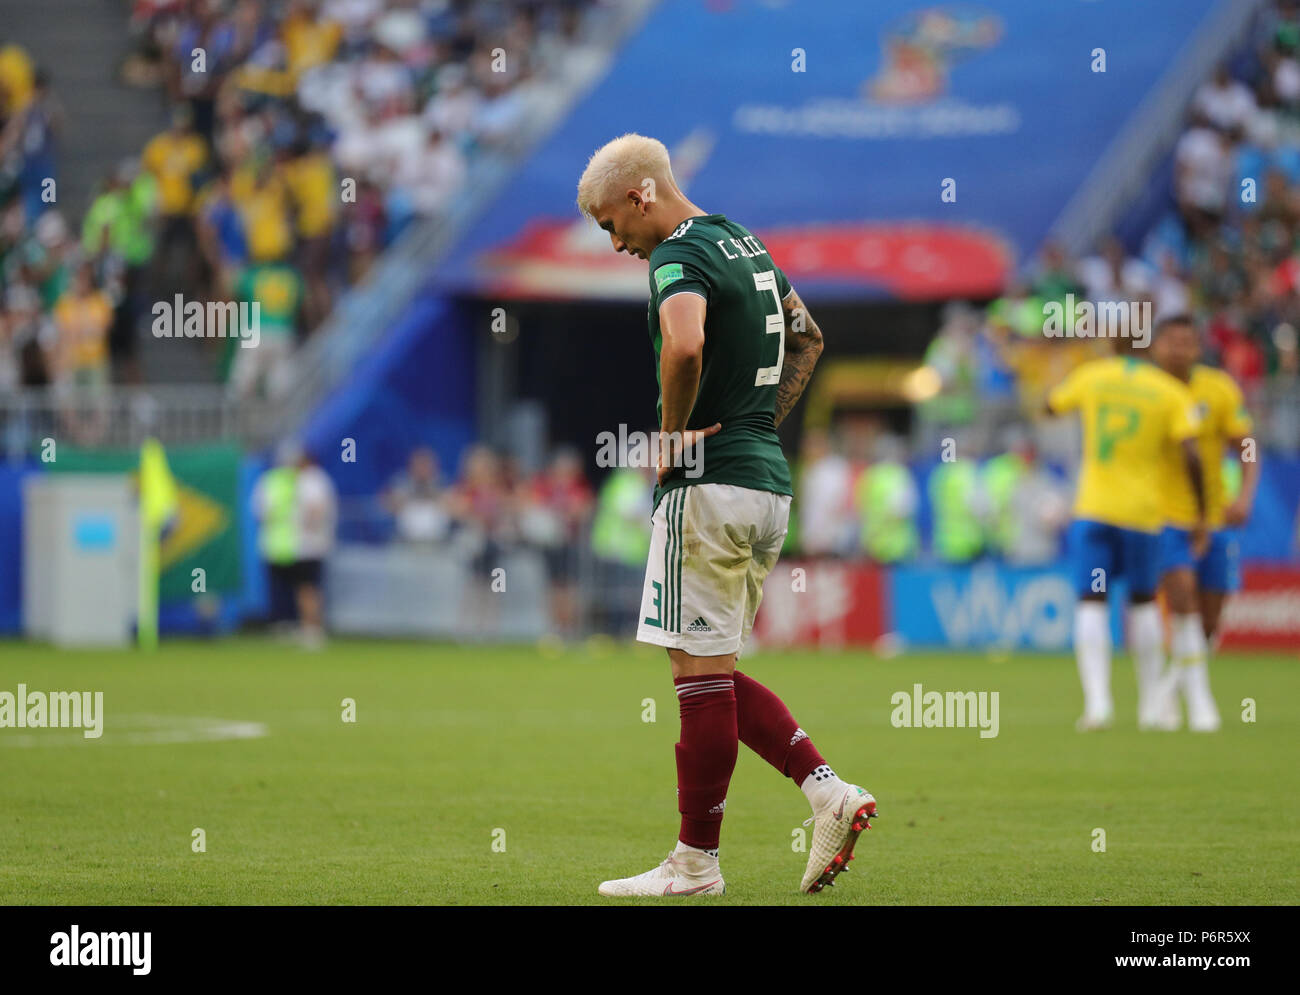 Samara, Russia. 02nd July, 2018. Soccer, World Cup 2018, Final round - round of 16: Mexico vs. Brazil at the Samara stadium: Mexico's Carlos Salcedo walking disappointed across the field after Mexico conceded a goal. Credit: Christian Charisius/dpa/Alamy Live News Stock Photo